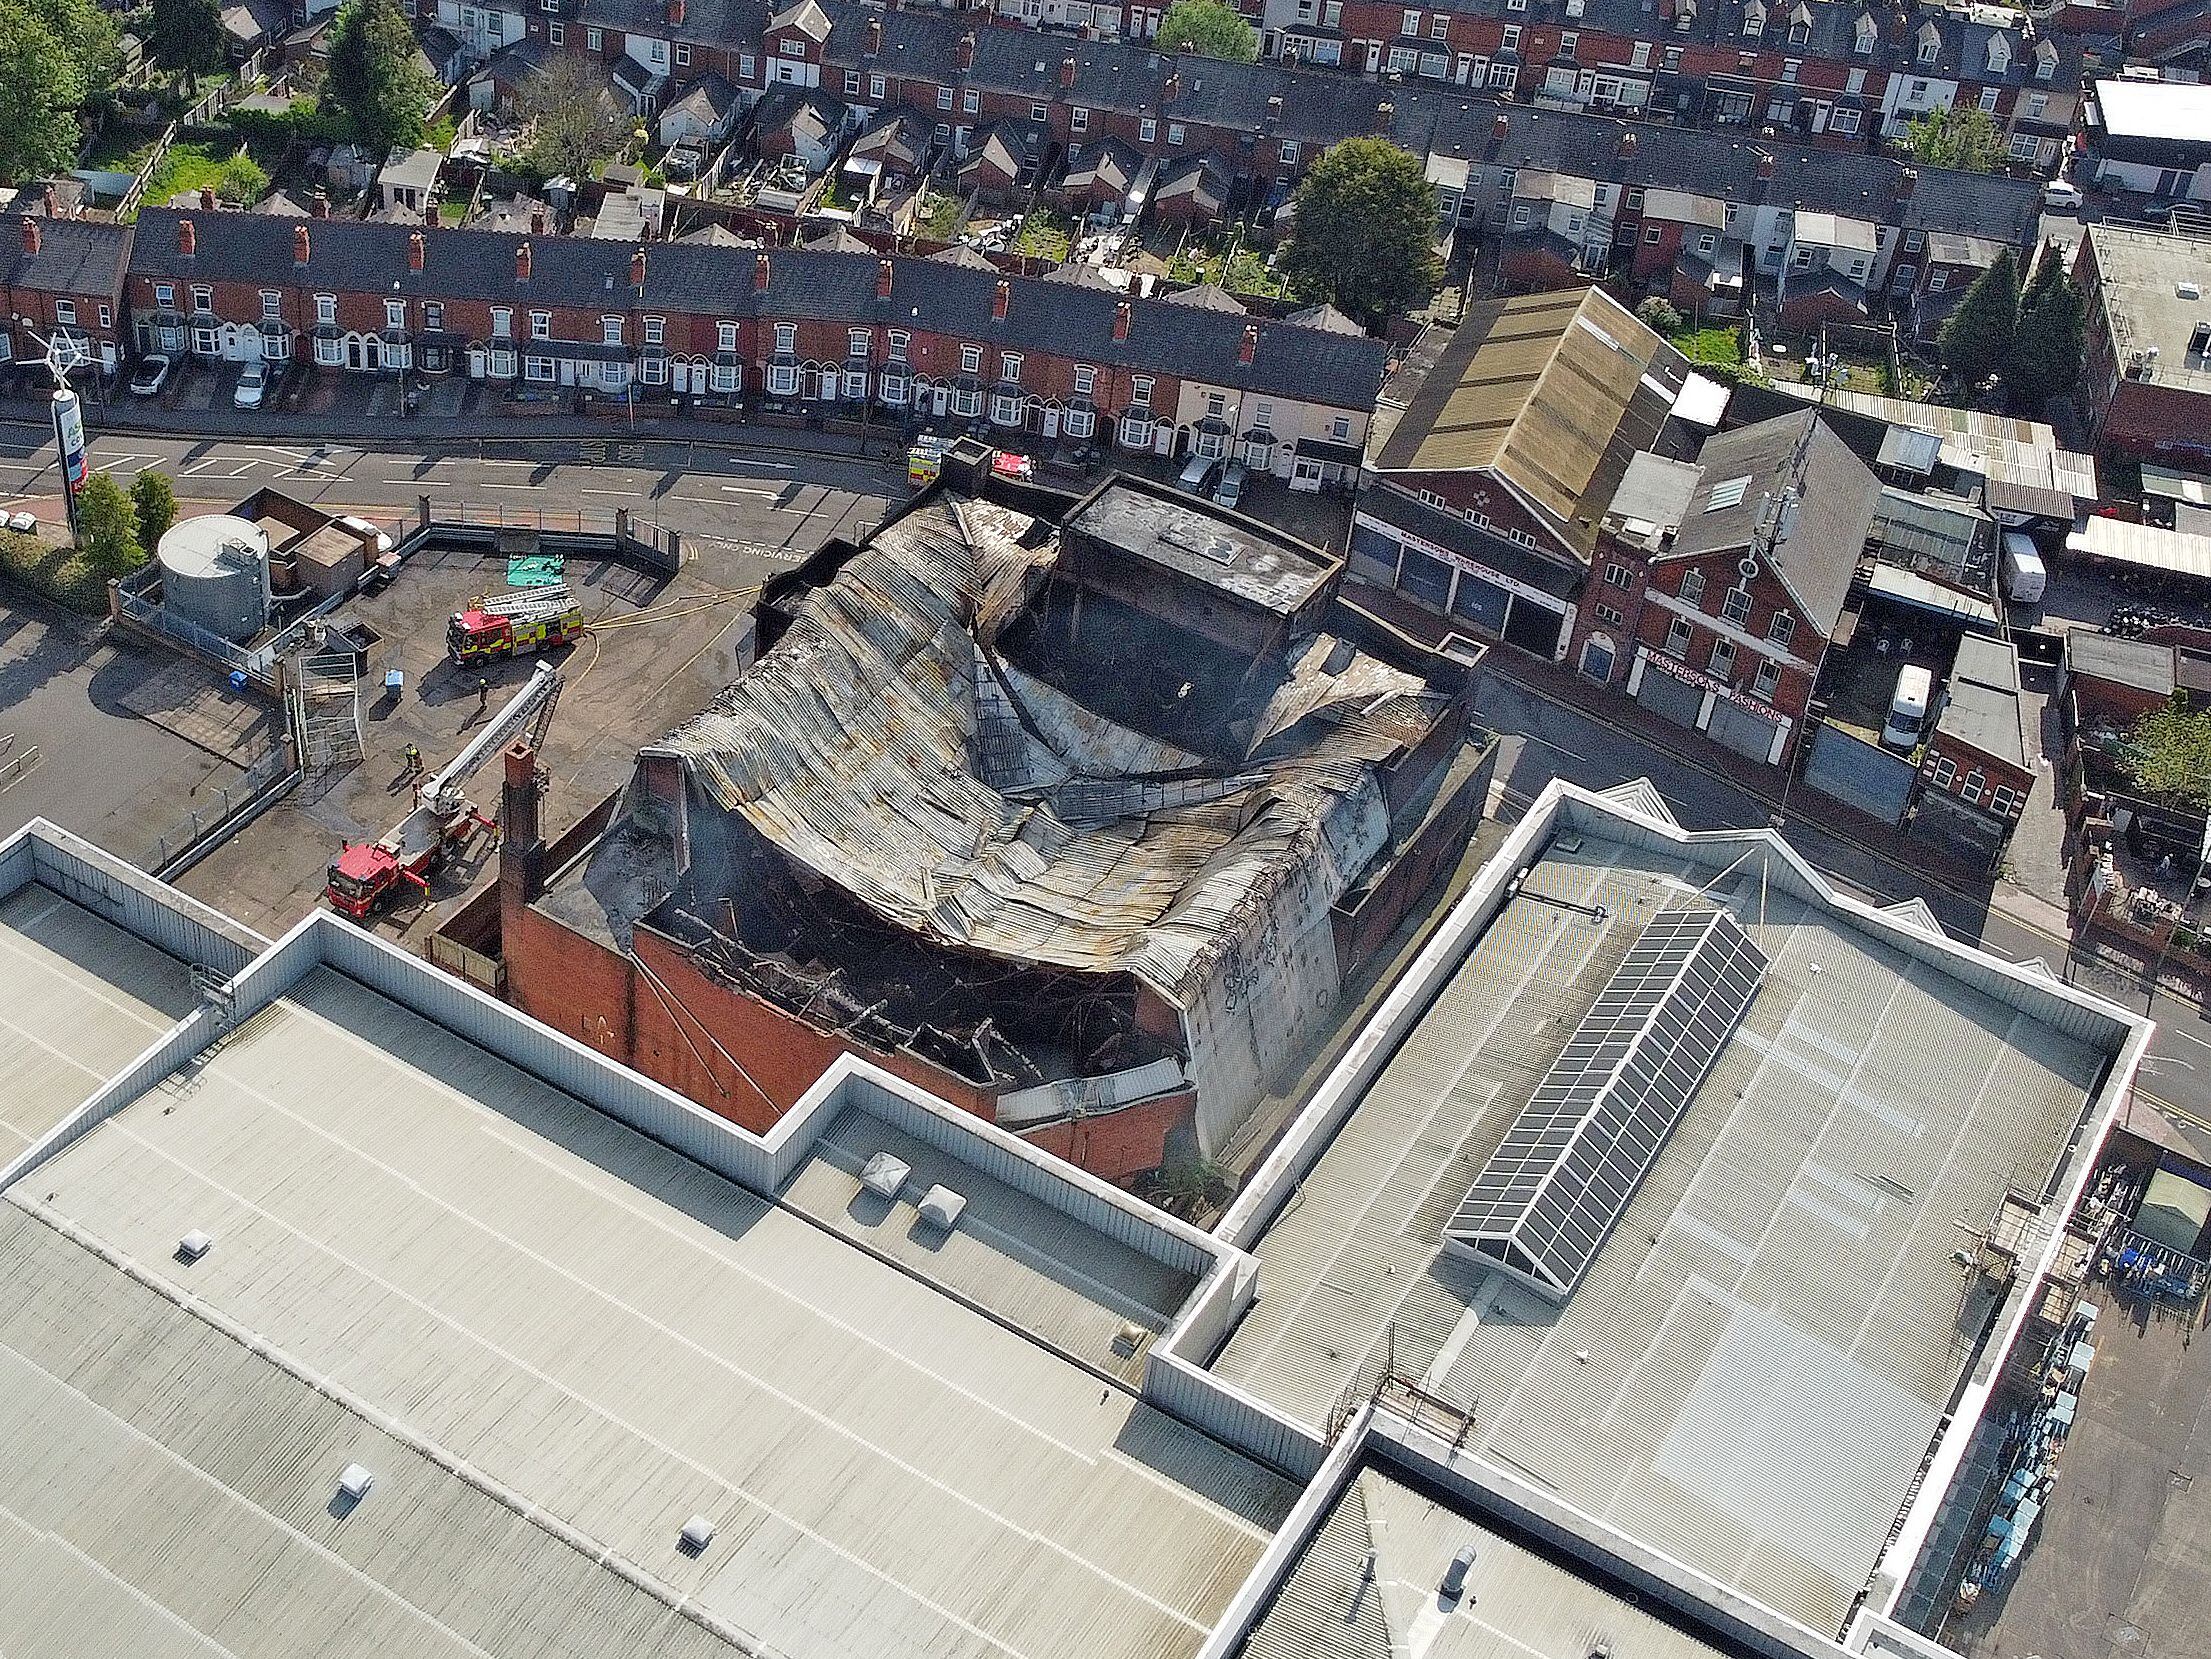 Watch as video footage shows extent of damage at former cinema in Smethwick following huge blaze